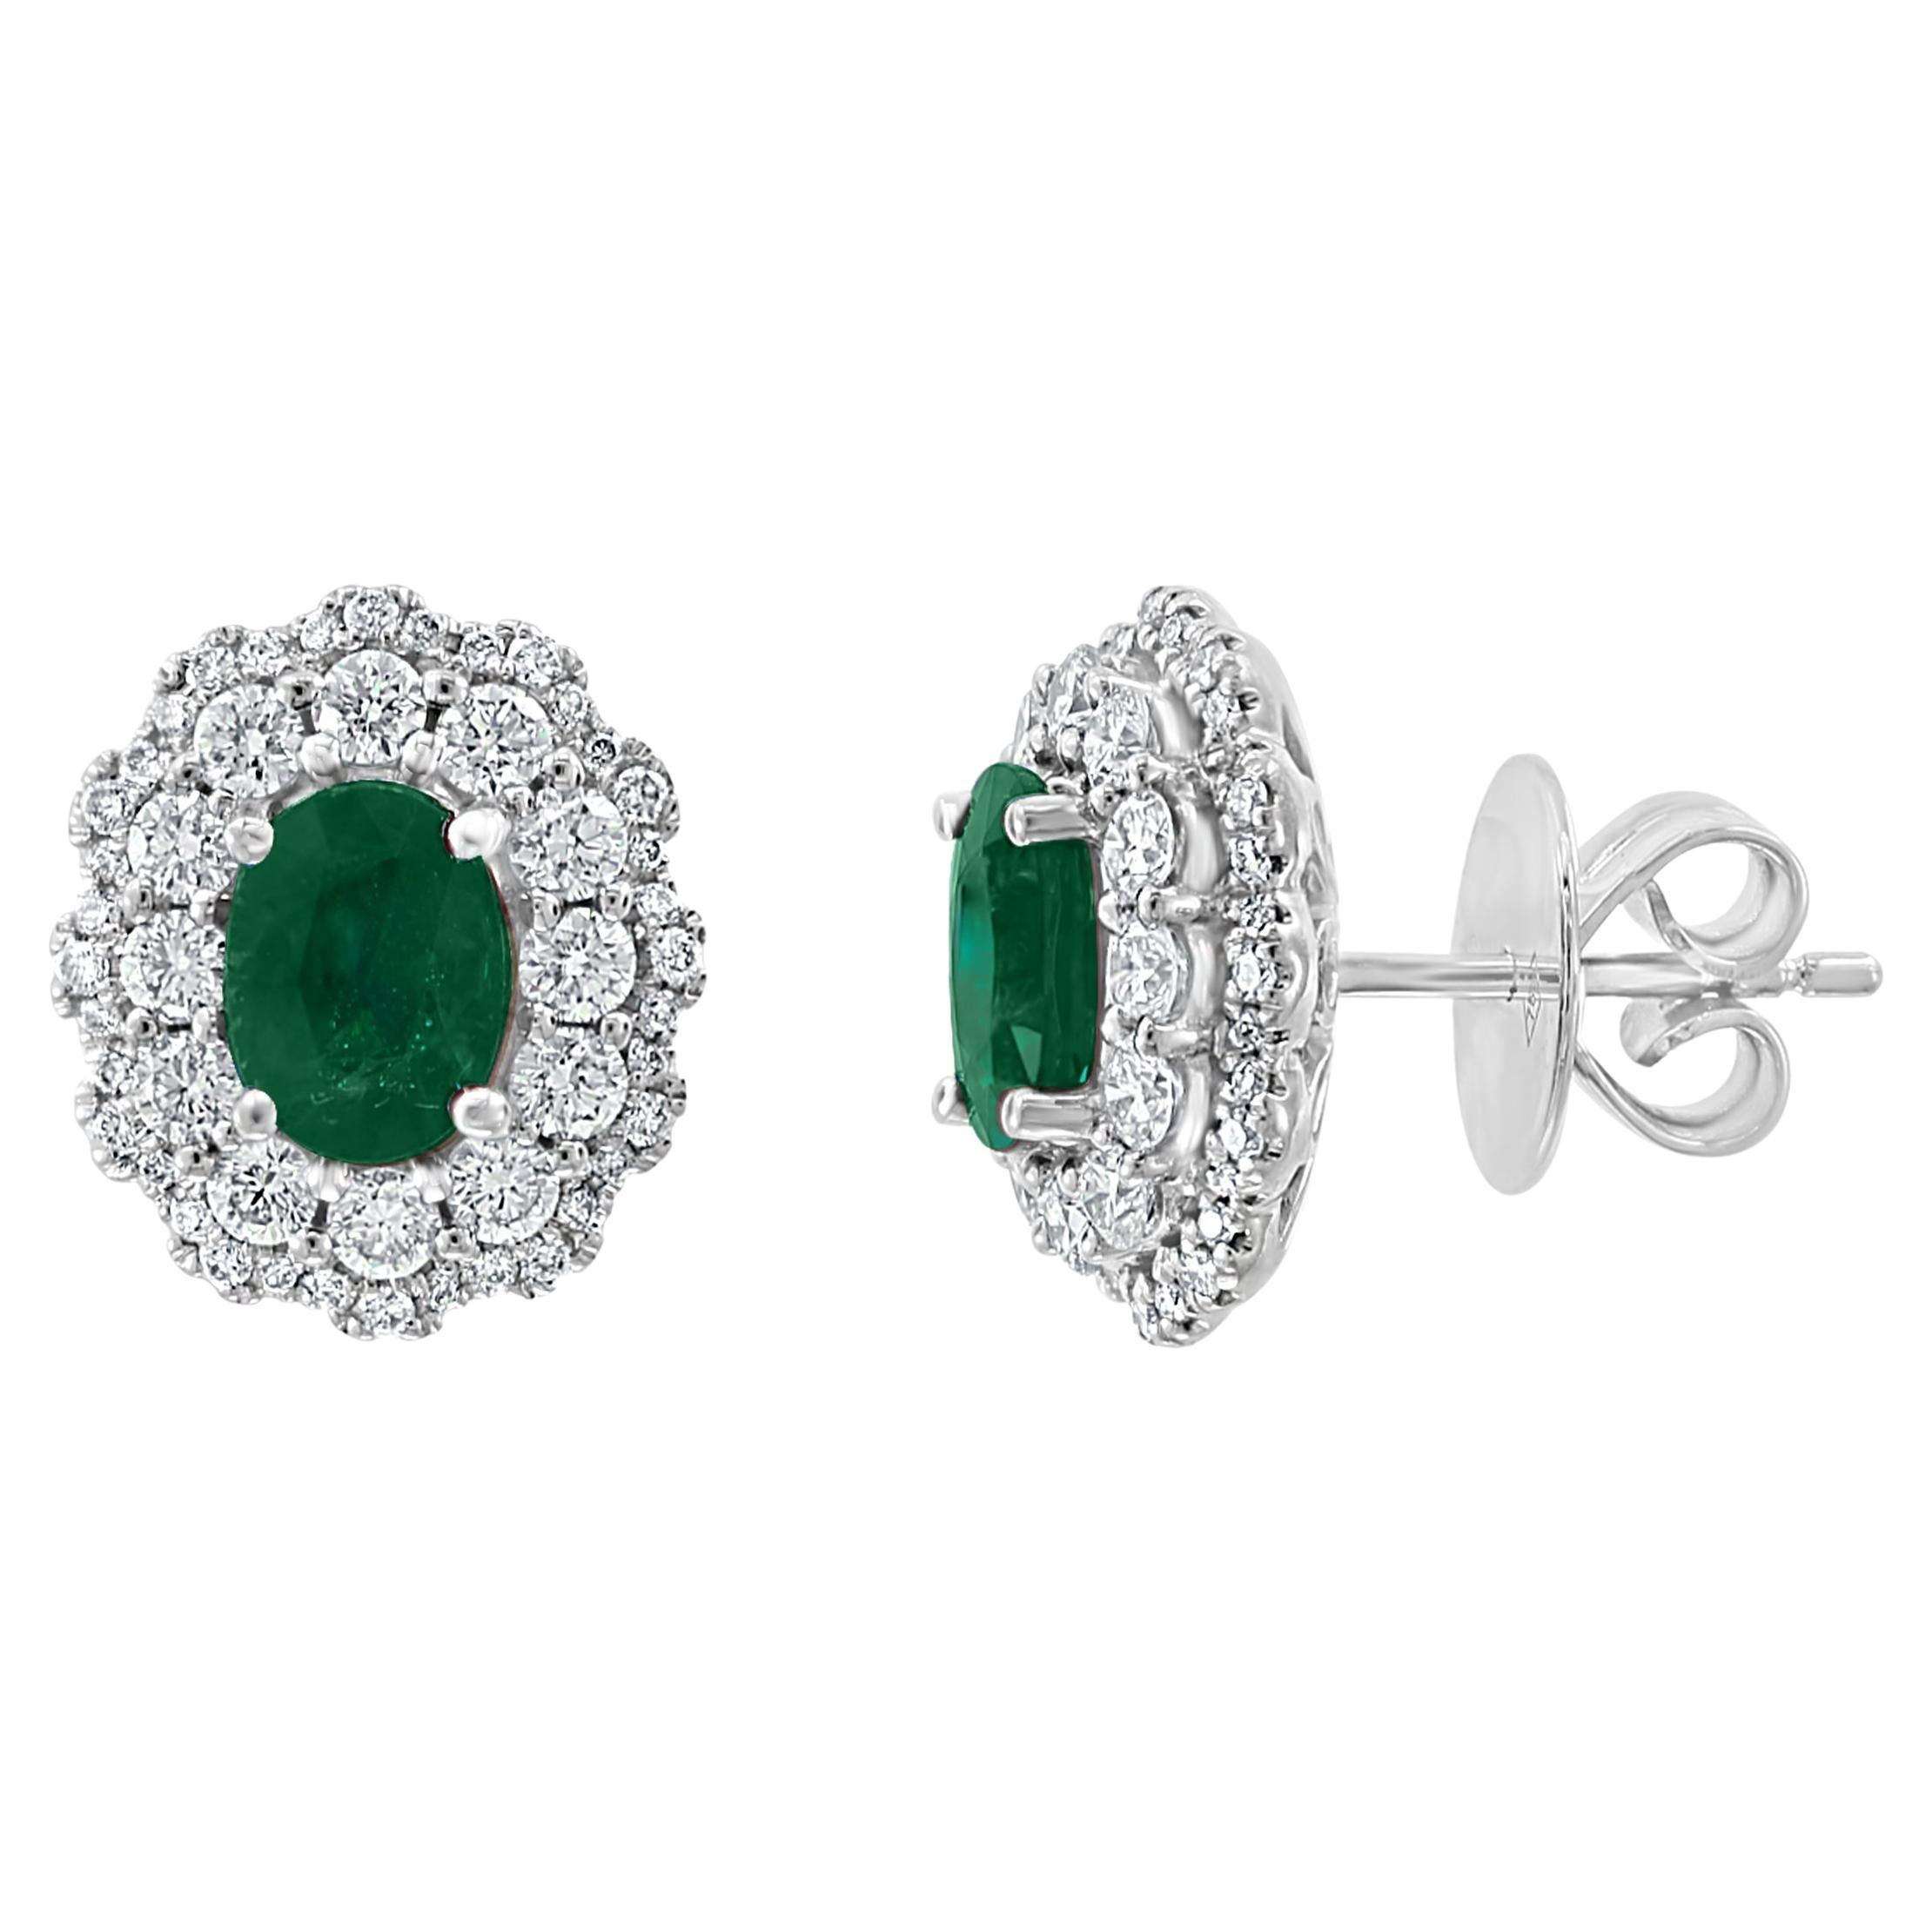 1.34 Carat Oval Cut Emerald and Diamond Halo Stud Earrings in 18K White Gold For Sale